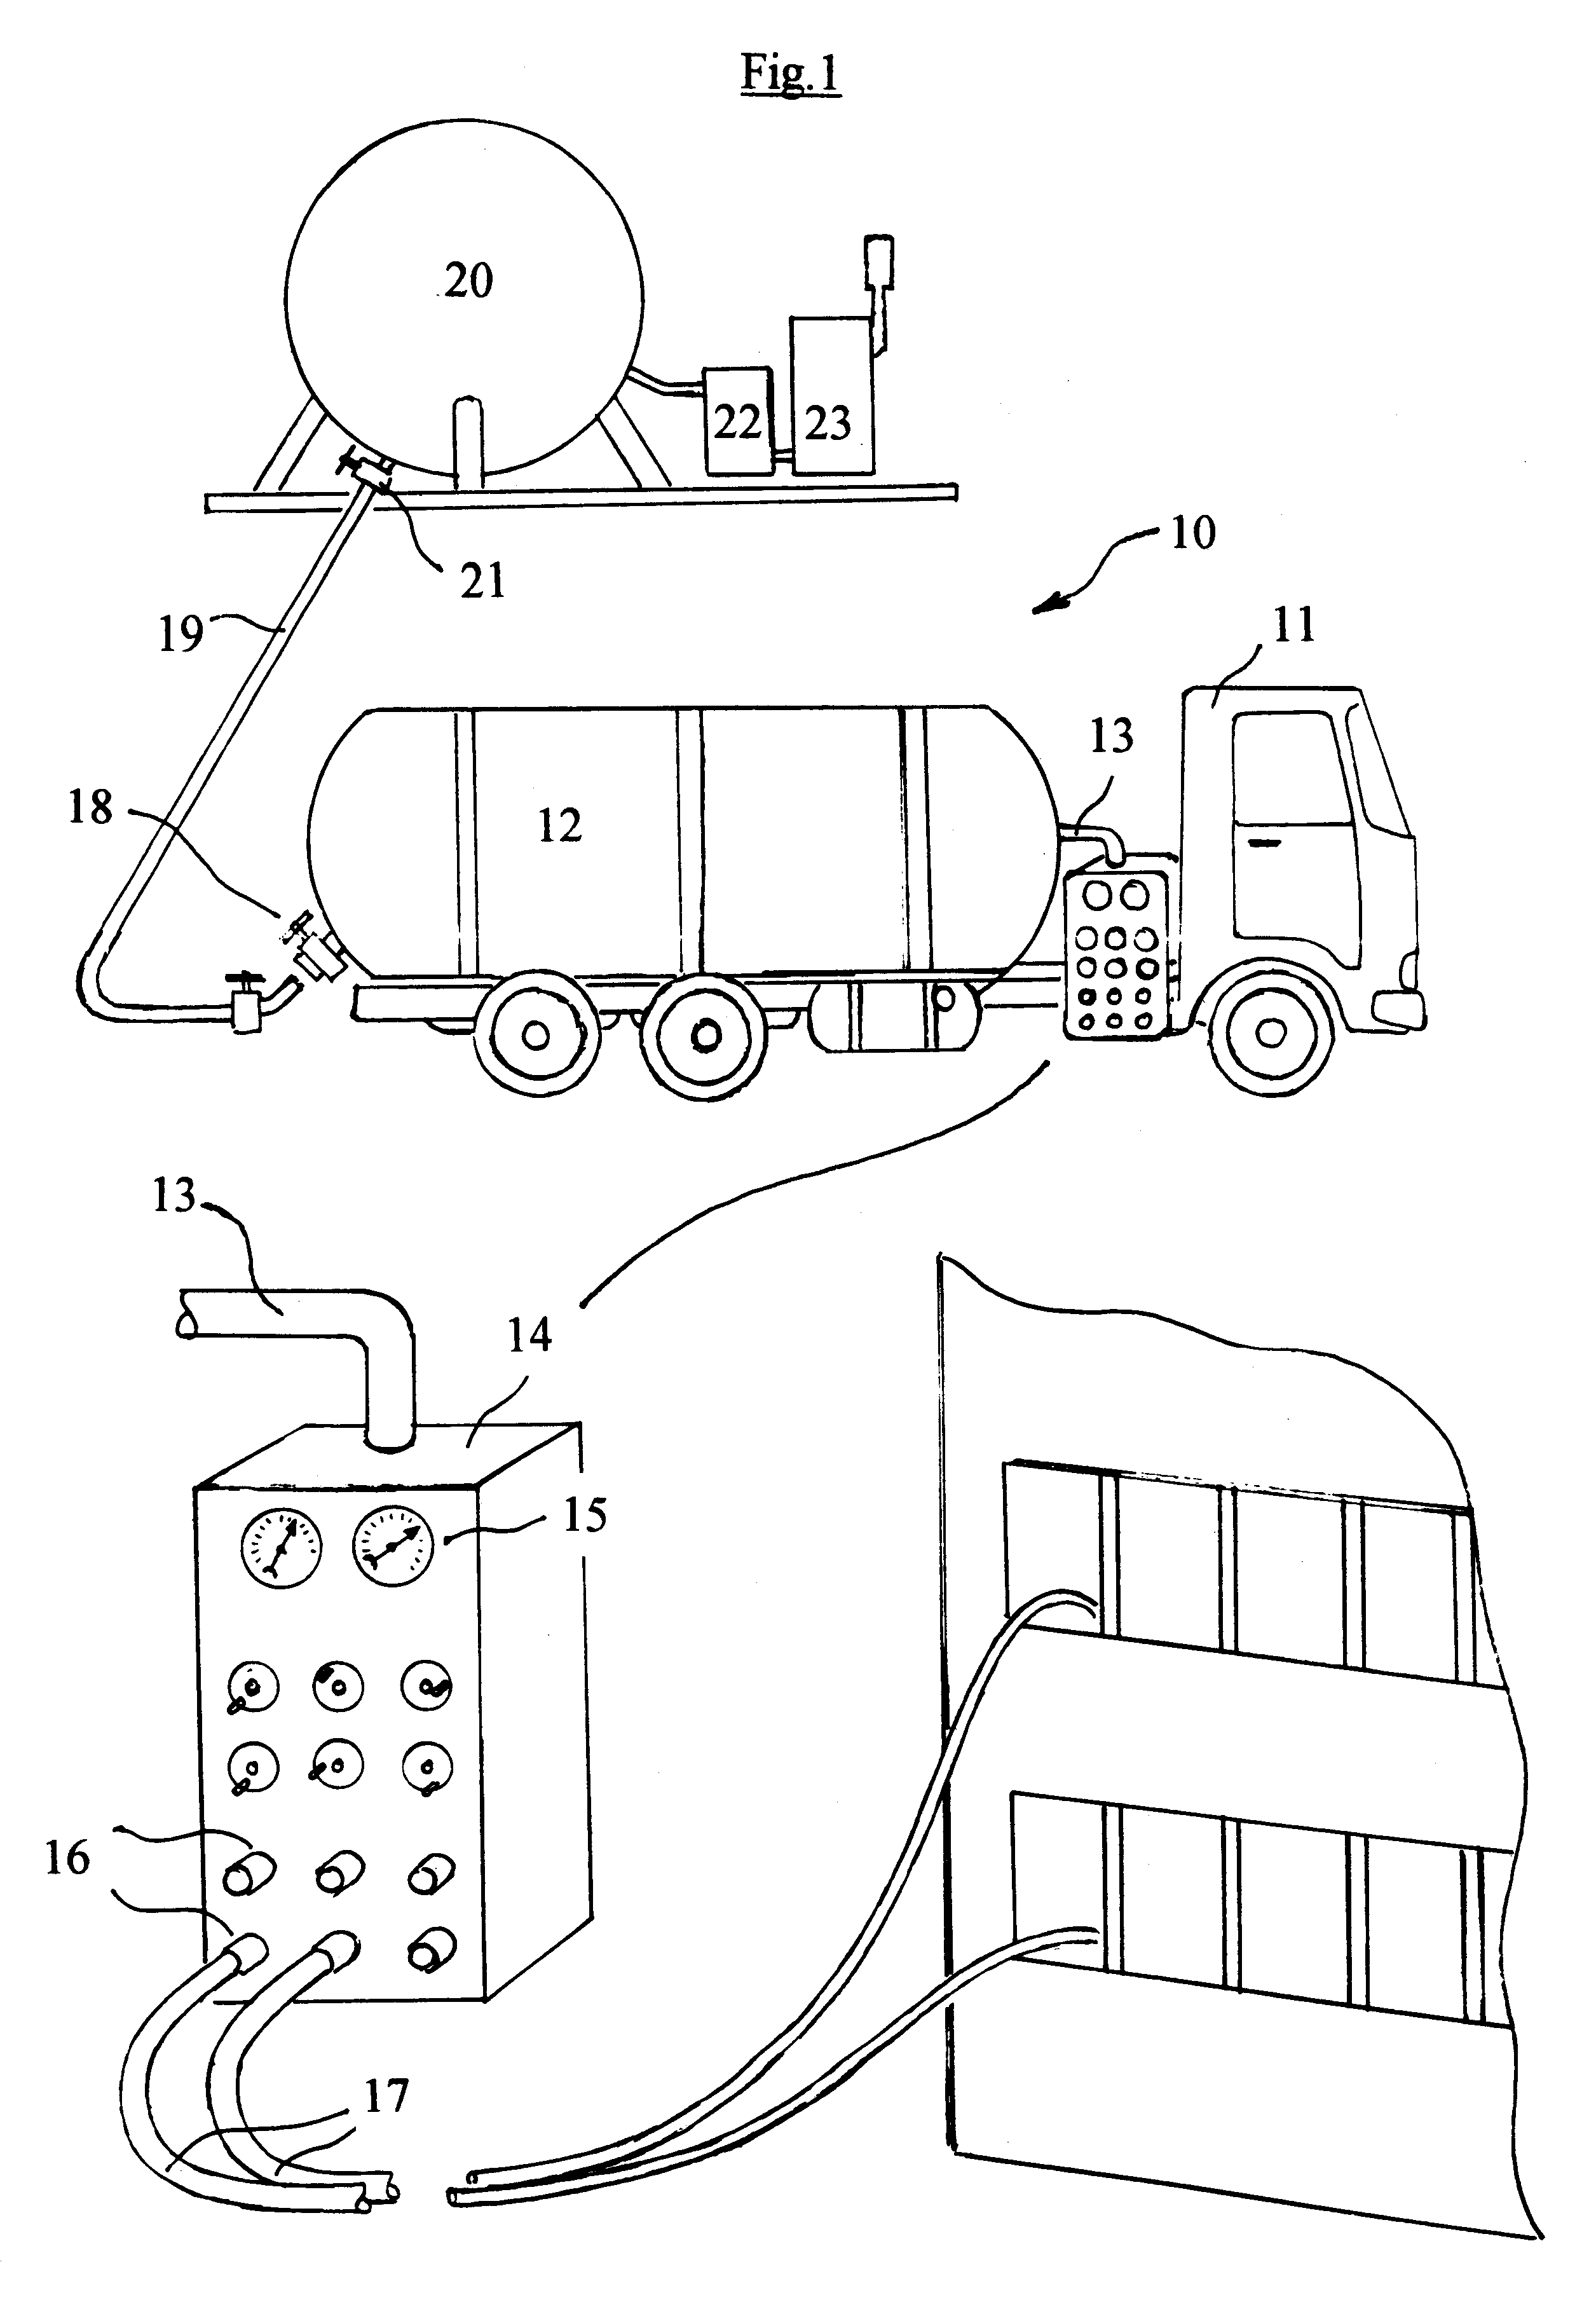 Mobile firefighting systems with breathable hypoxic fire extinguishing compositions for human occupied environments